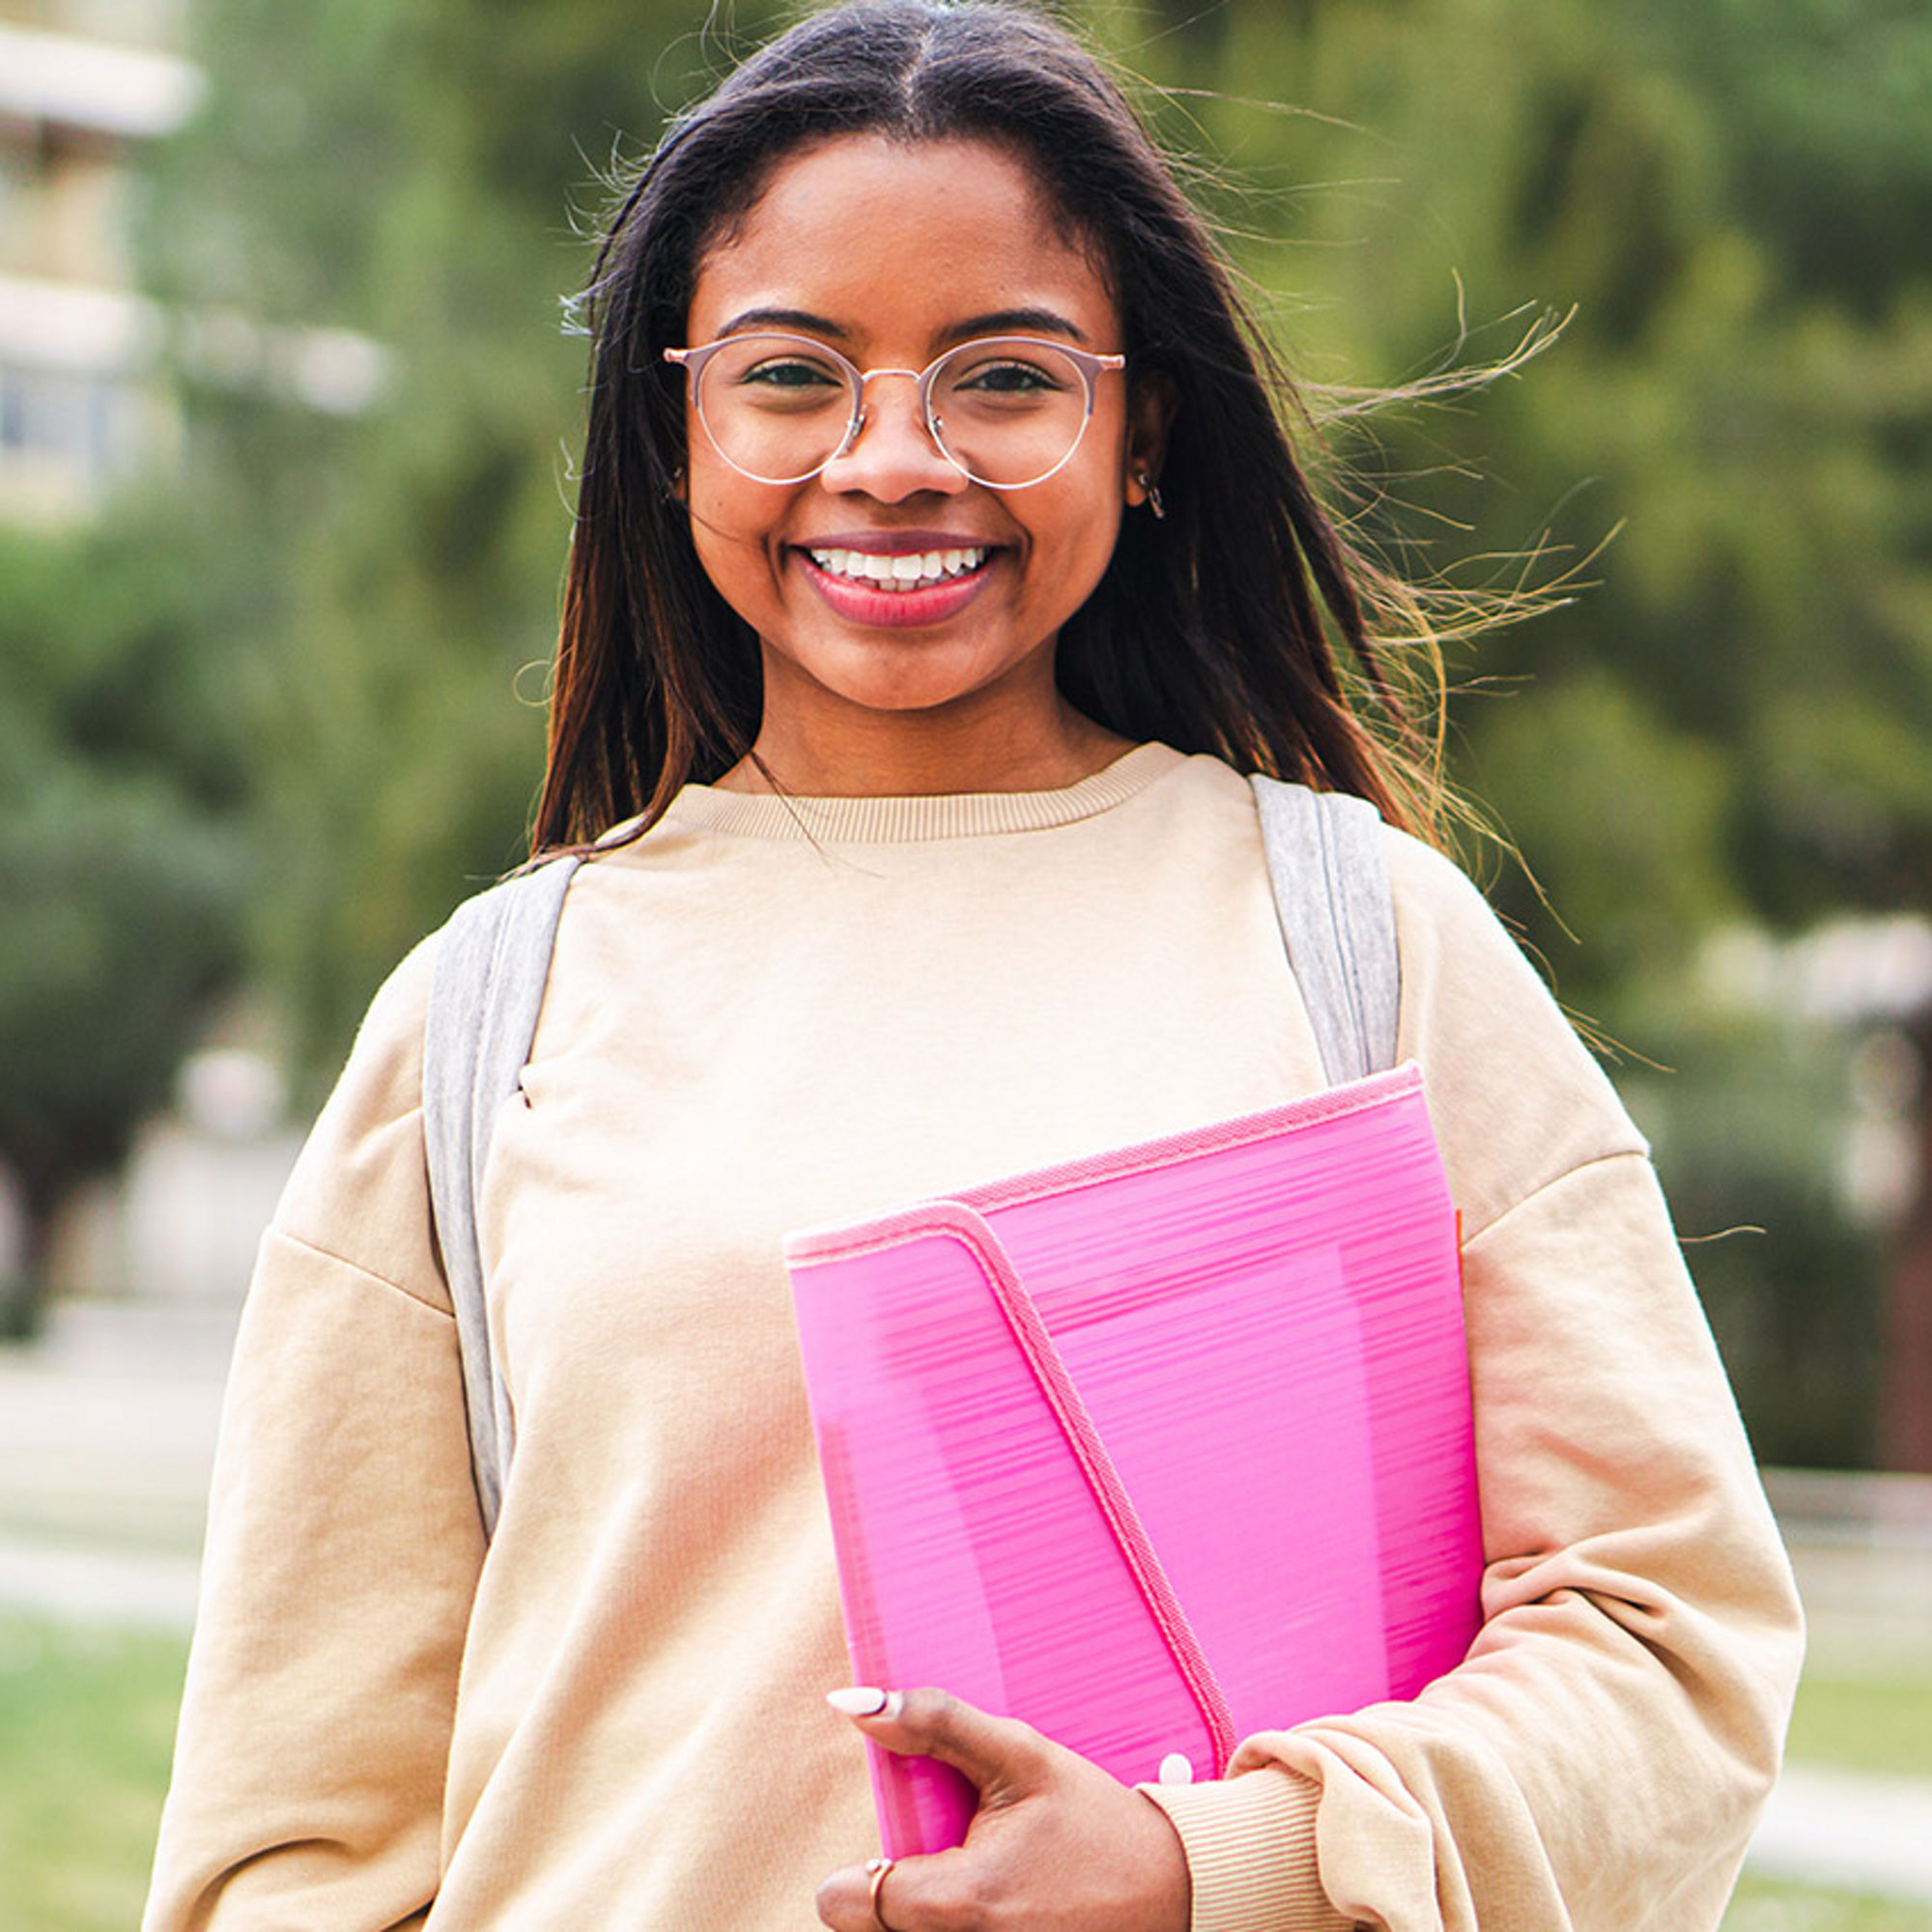 Young girl wearing backpack holding pink folder